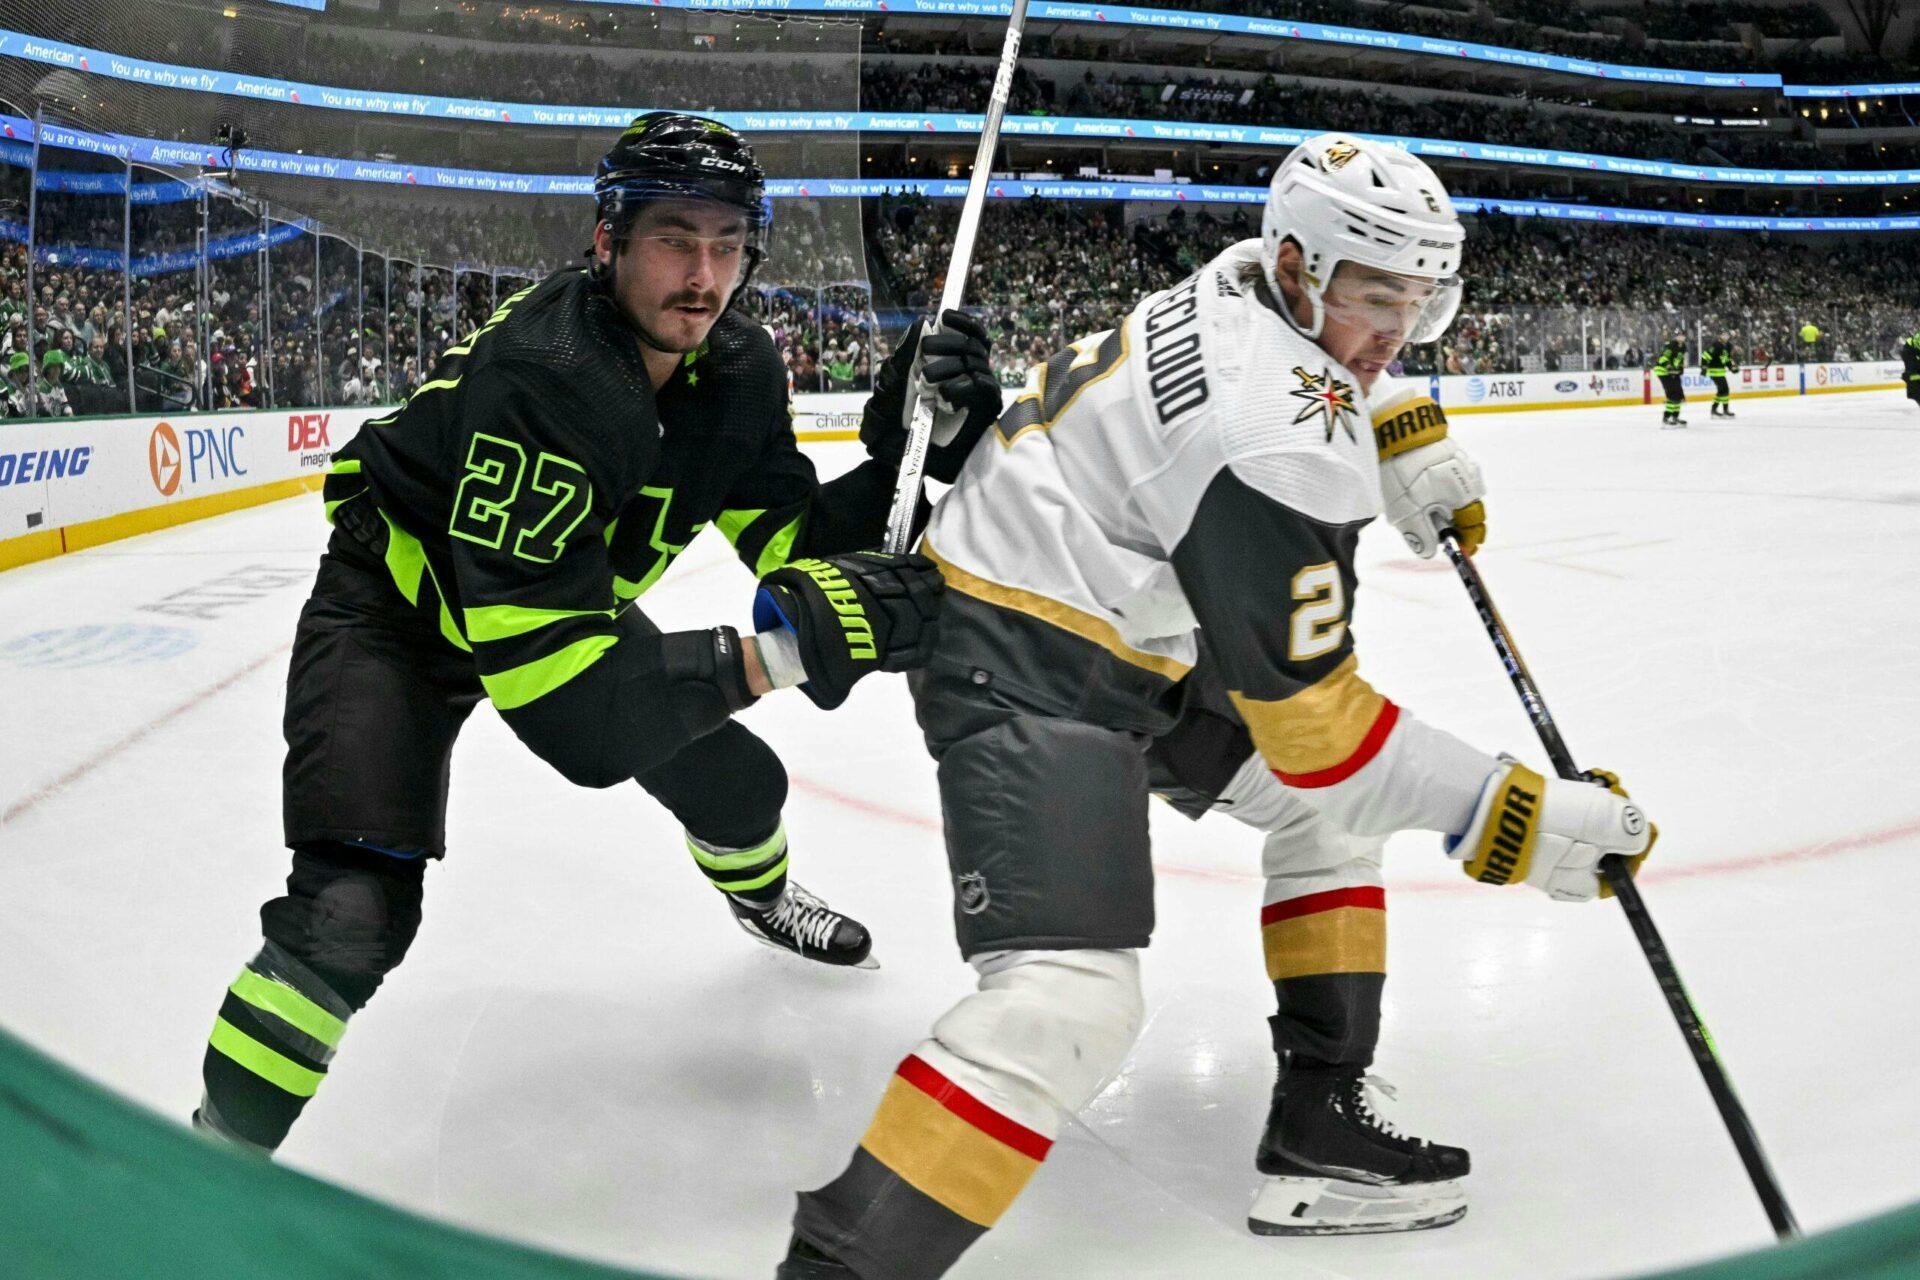 Dallas Stars vs Vegas Golden Knights, Game 4 Best Bets: Back the Knights as Home Dogs